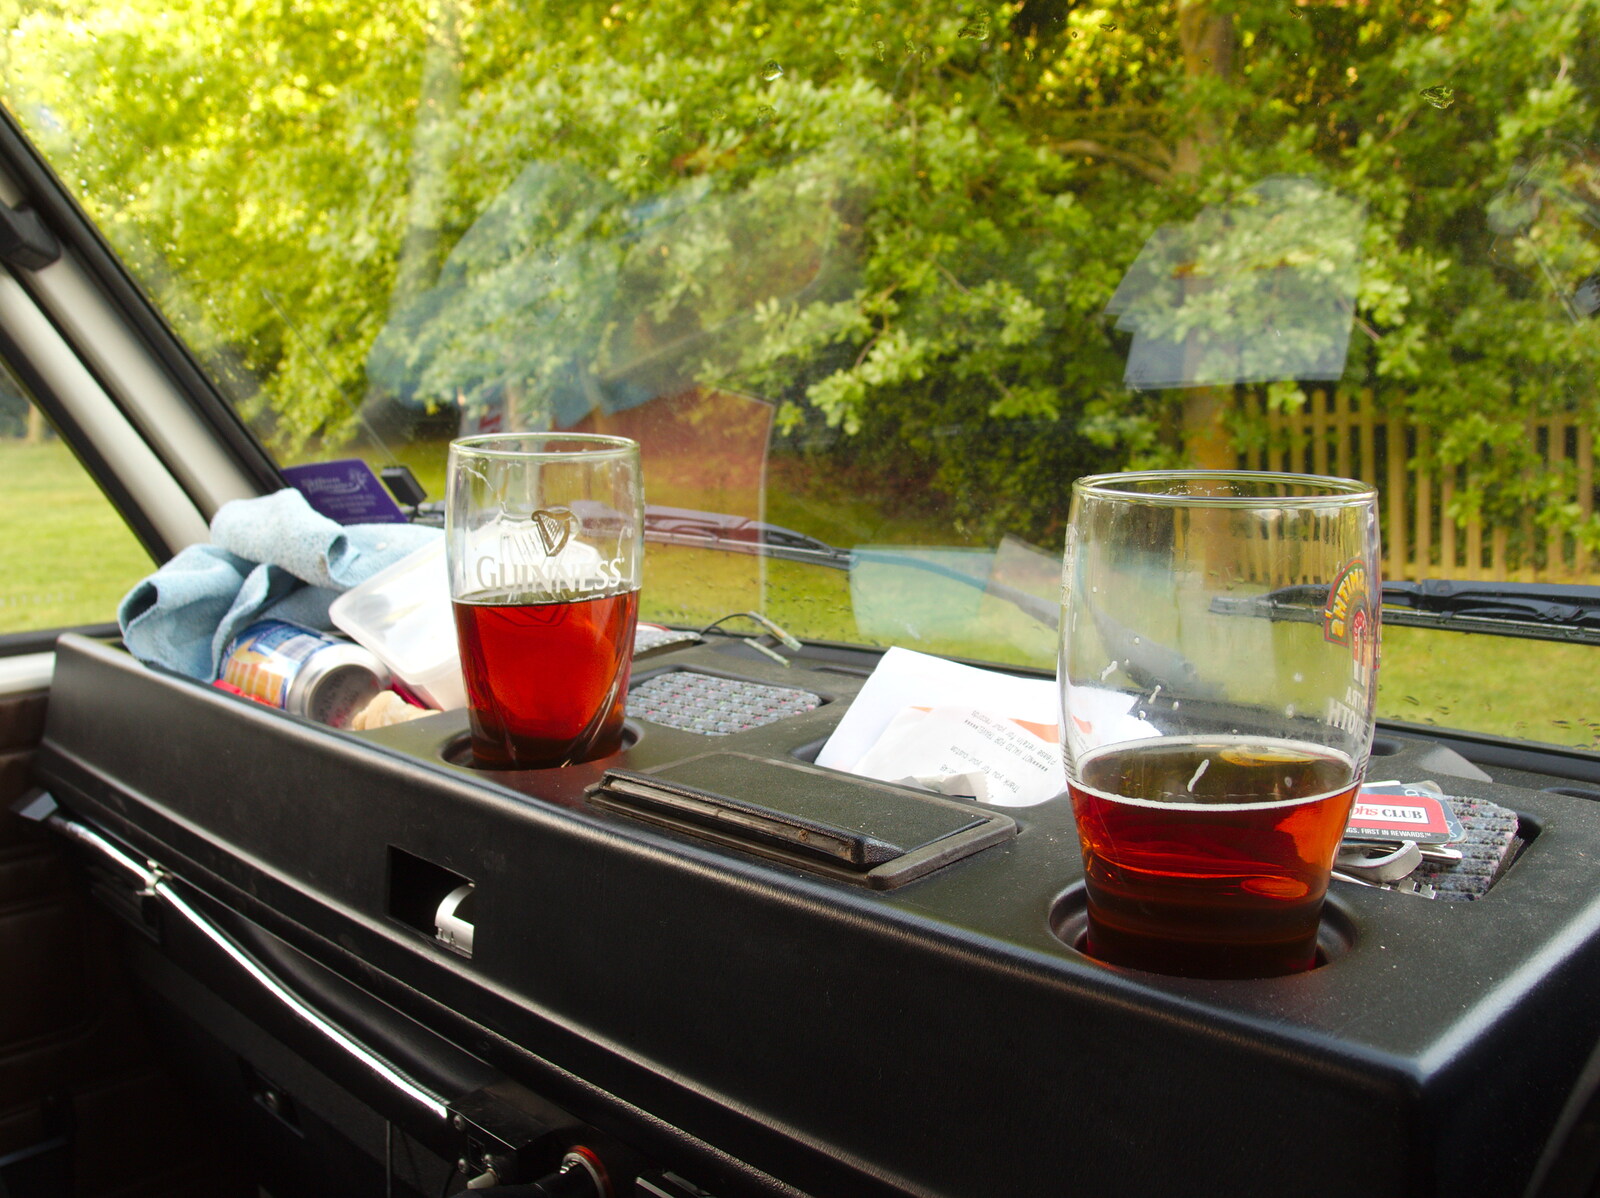 The cup holders in the van come in handy from The BBs Play Scrabble at Wingfield Barns, Wingfield, Suffolk - 24th May 2014